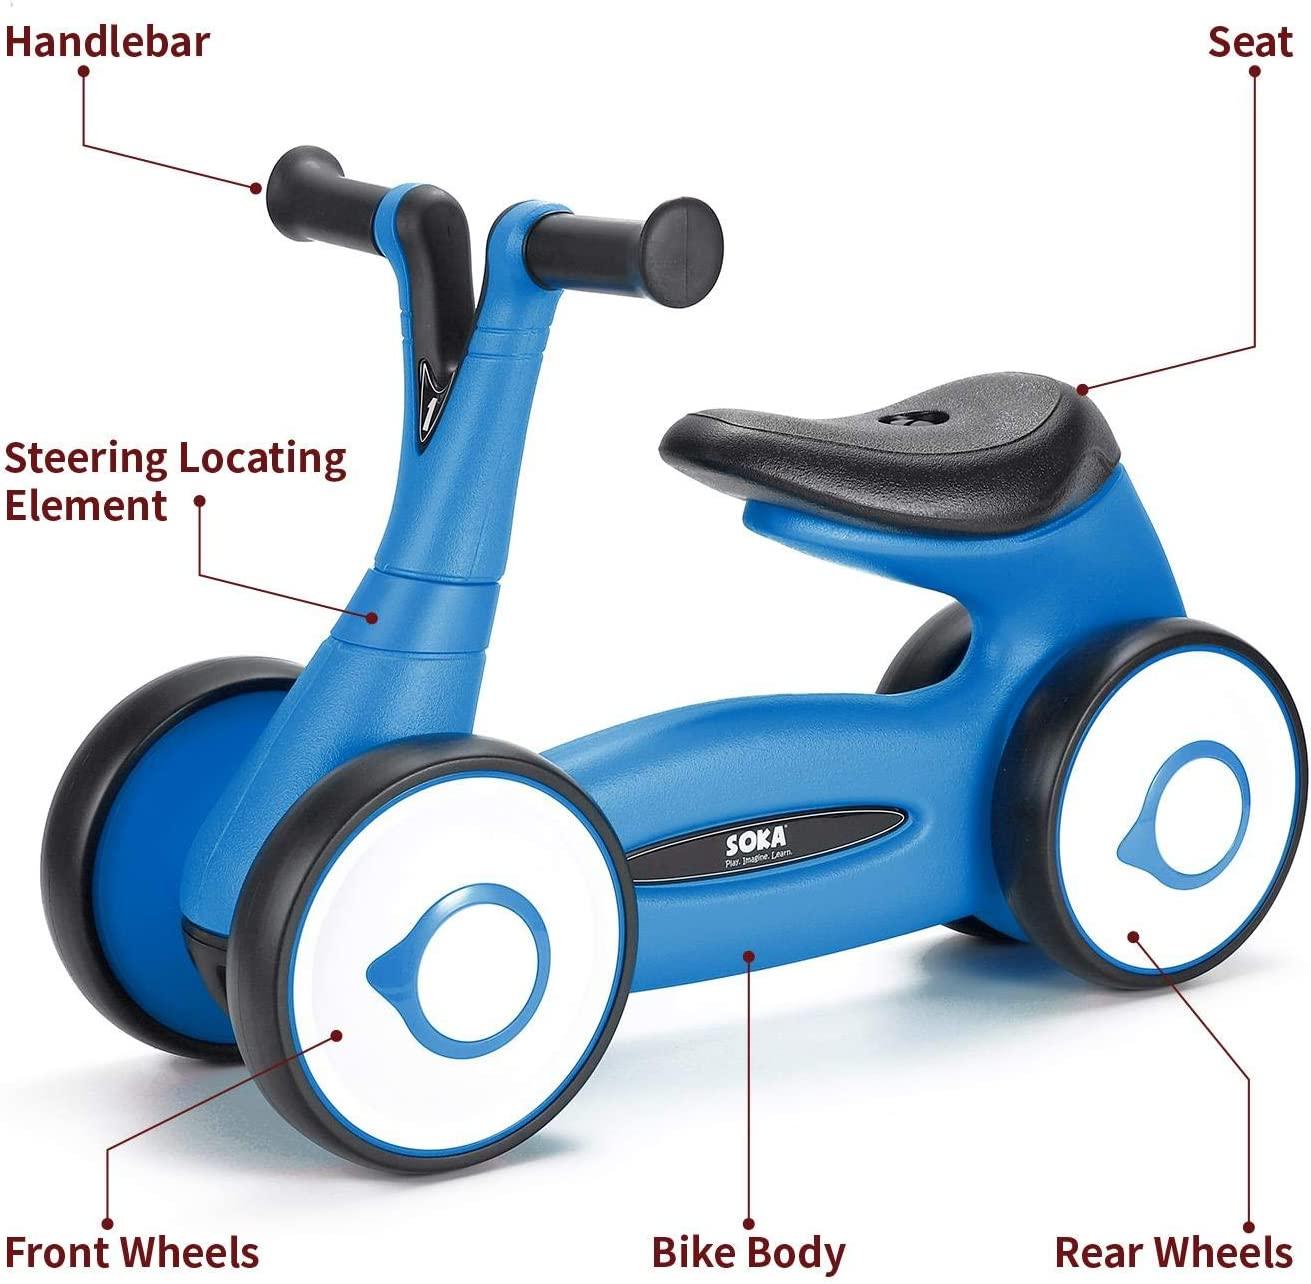 Baby Toddler Balance Bike 4 Wheel Ride-on Bicycle Toy -  3 Colours